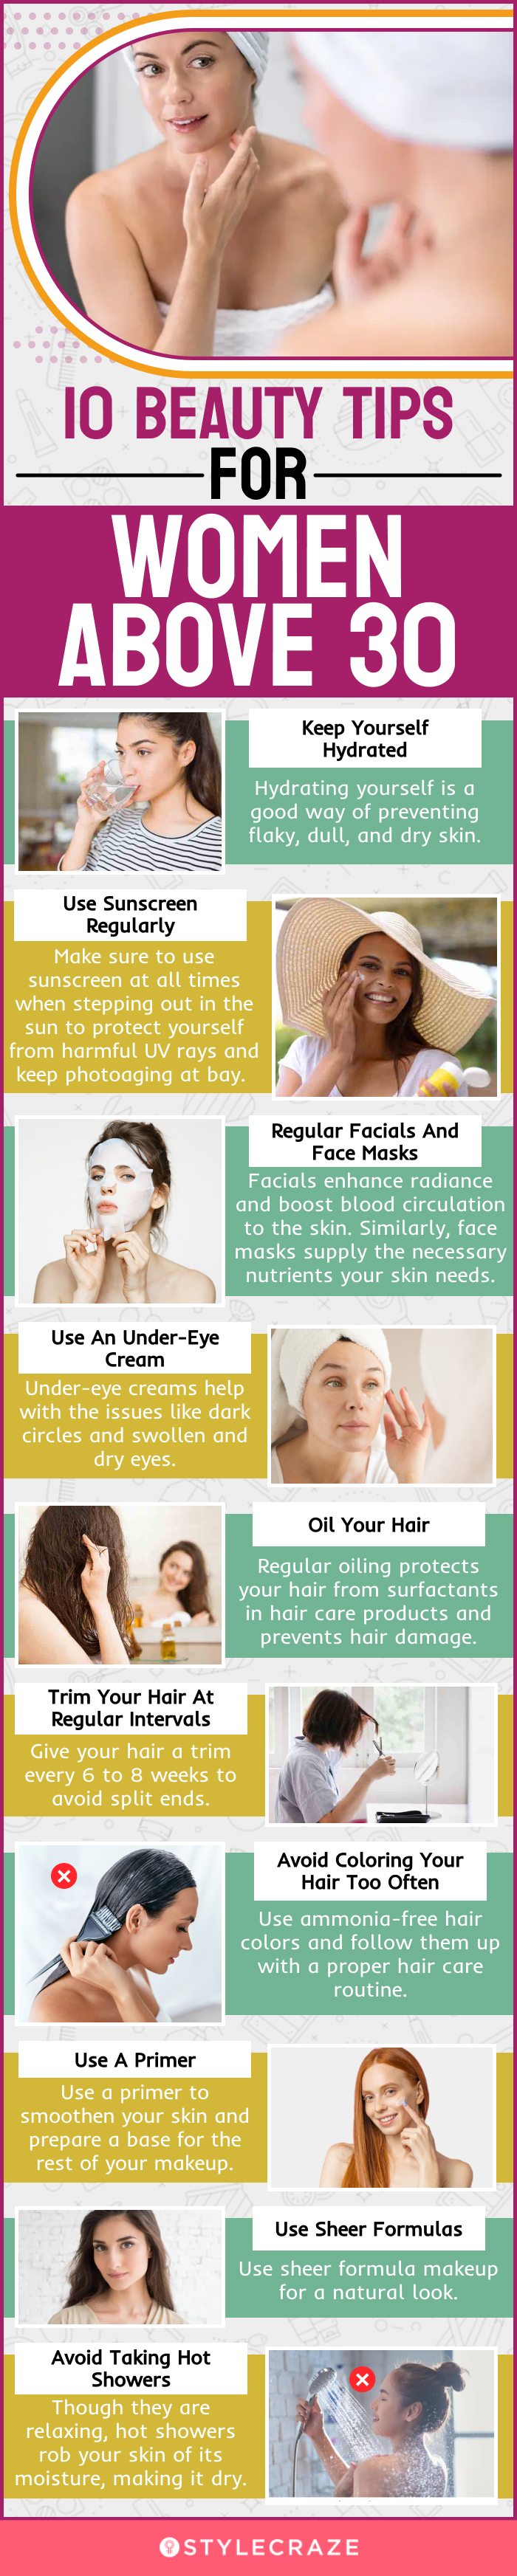 Top 30 Beauty Tips For Women Over 30